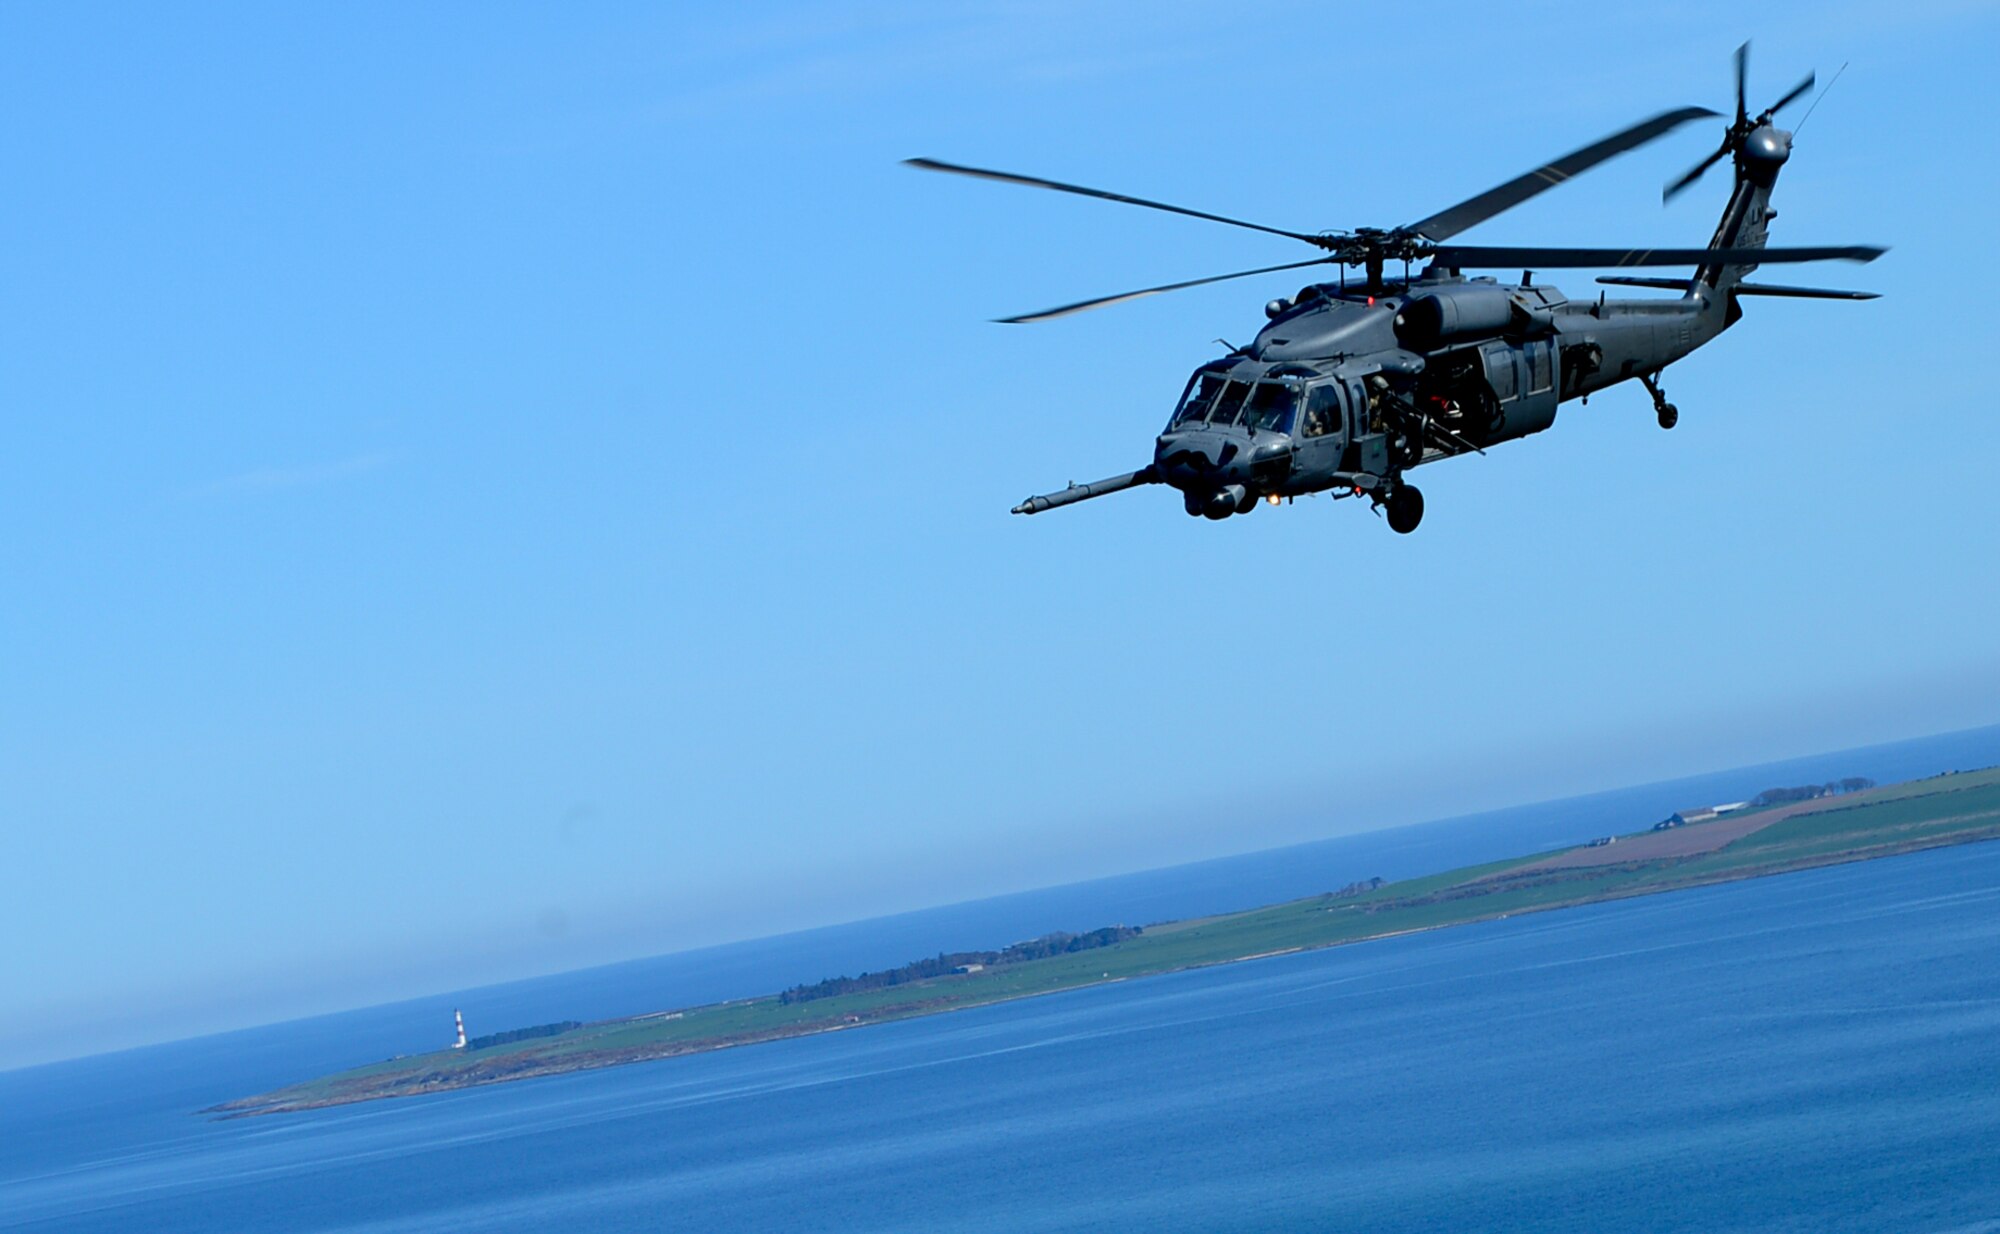 An HH-60G Pave Hawk assigned to Royal Air Force Lakenheath's 56th Rescue Squadron, flies over Scotland during exercise Joint Warrior 15-1, April 22, 2015. The training challenged aircrew, while preparing them for expeditionary operations. (U.S. Air Force photo/Senior Airman Erin O'Shea)